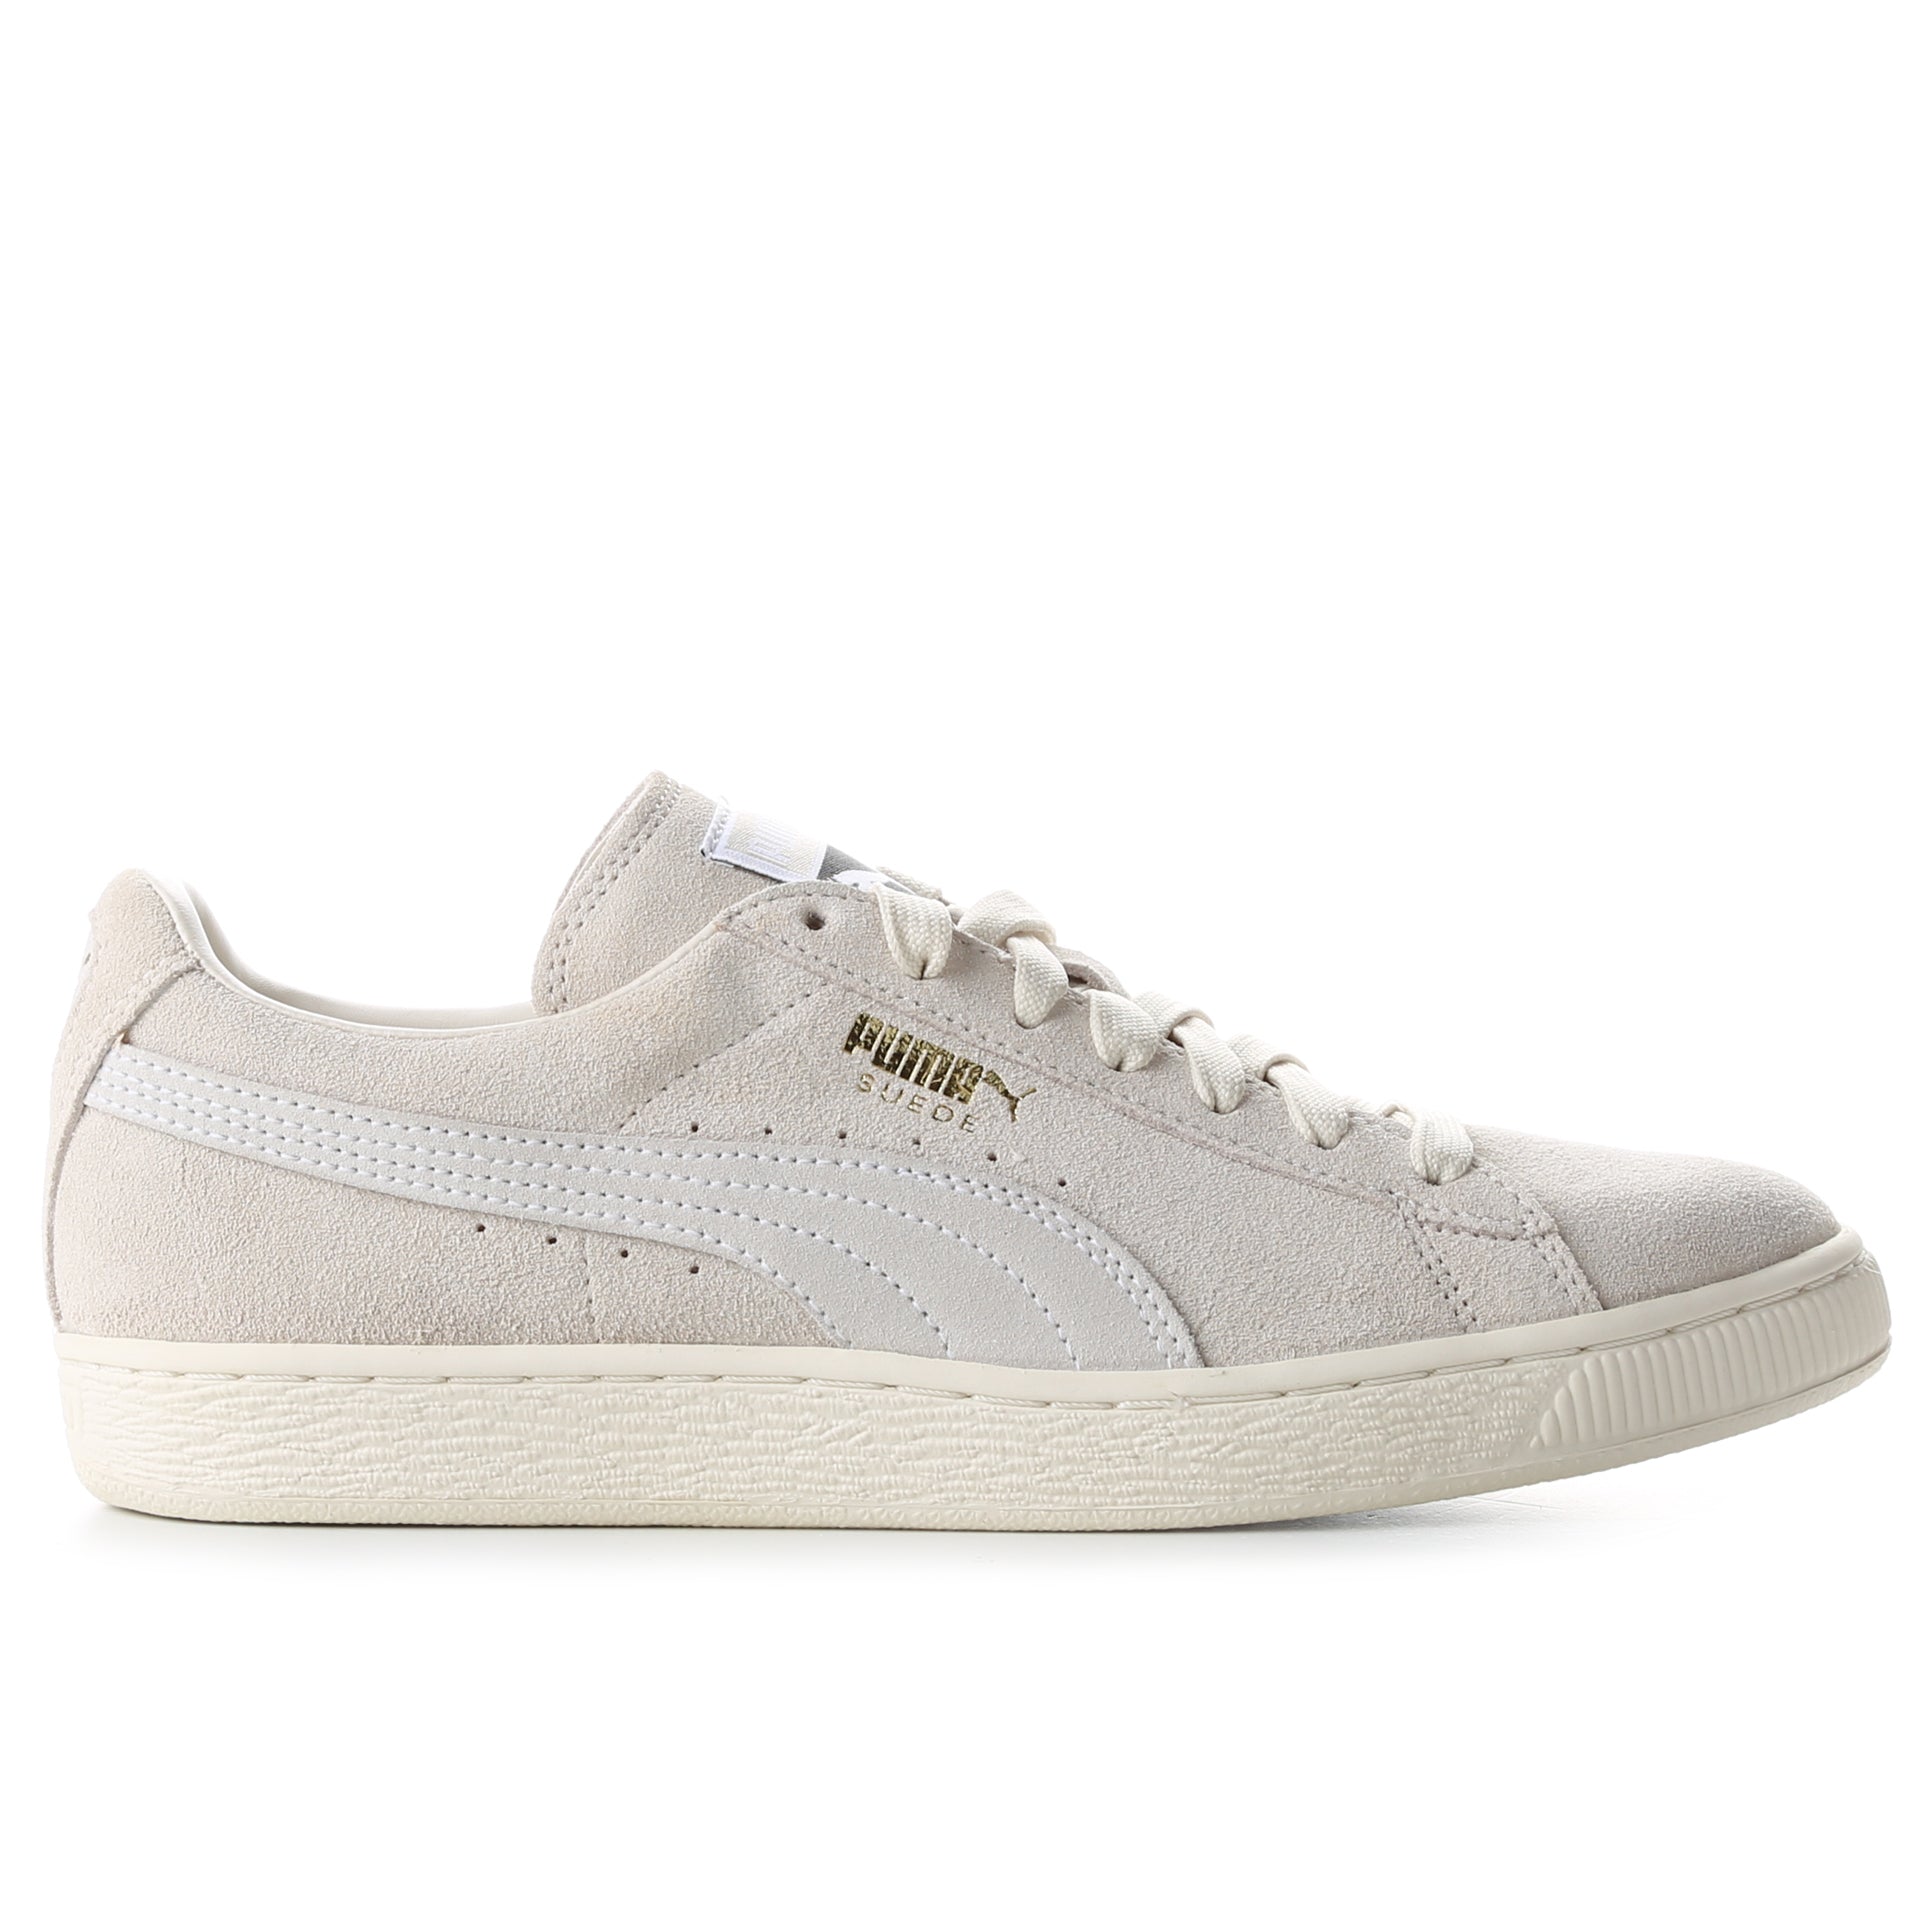 puma sneakers suede white